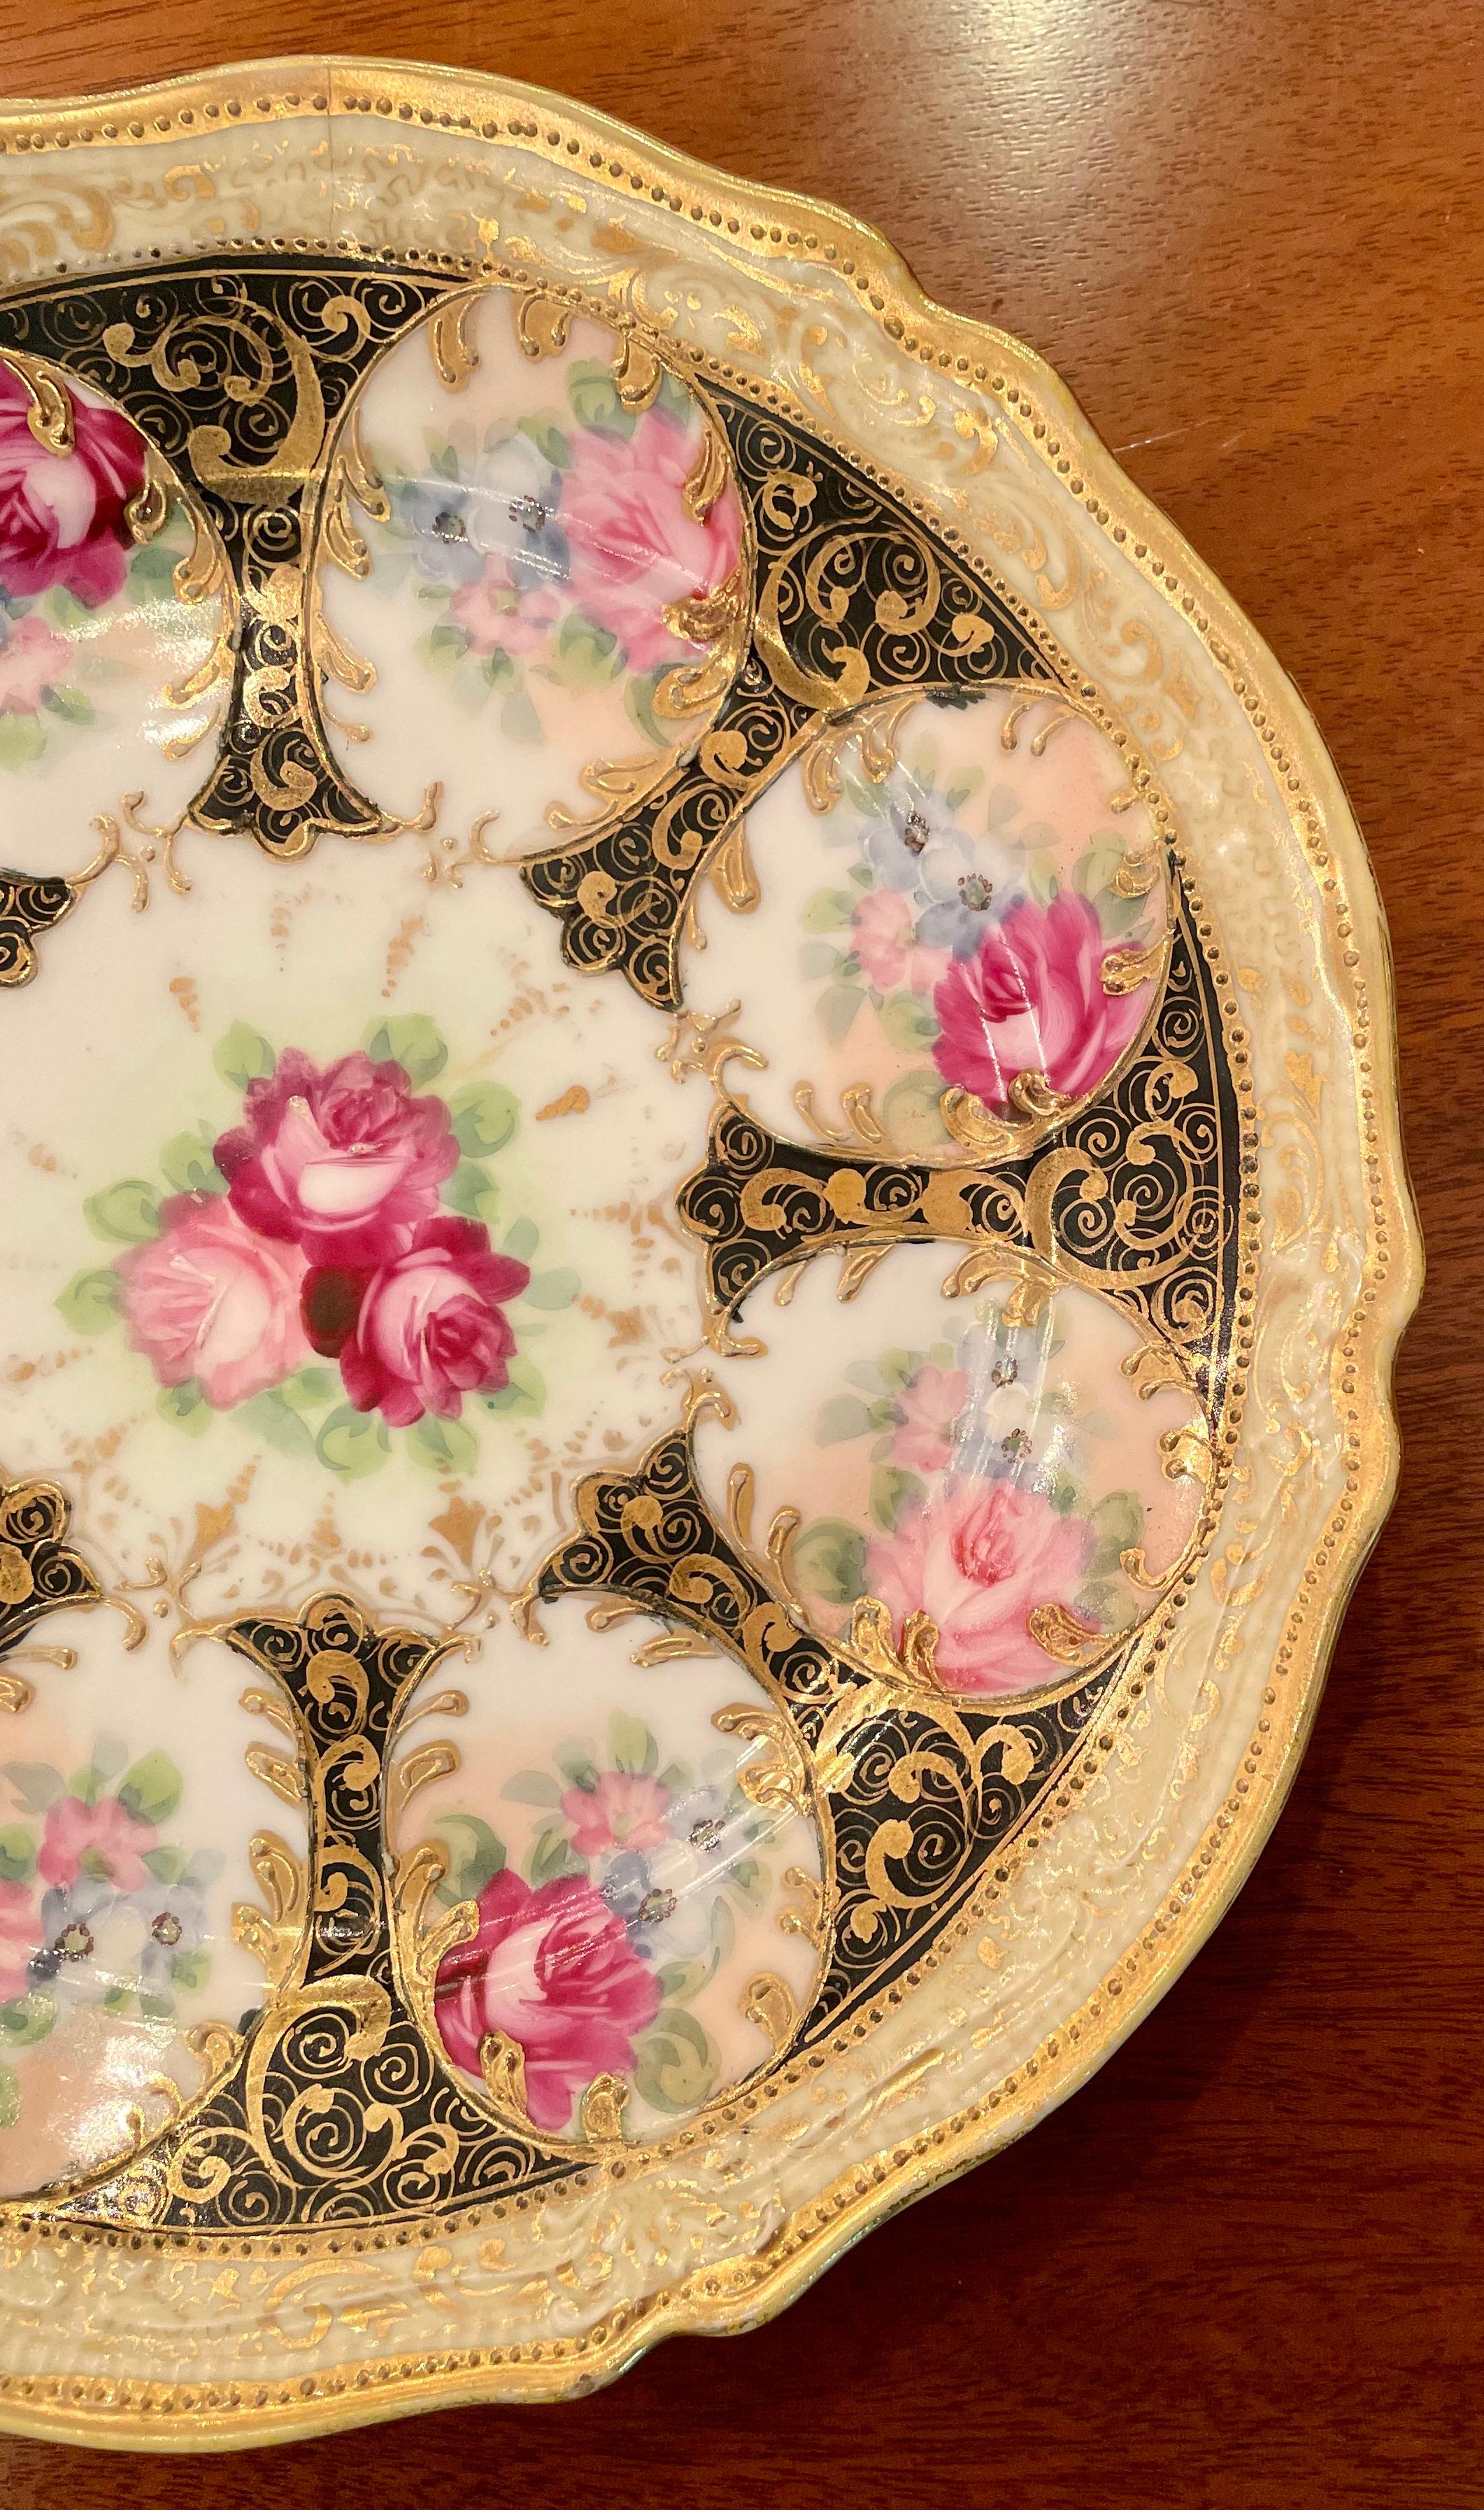 Antique Japanese porcelain plate, hand-decorated gold, ivory & black with florals, Circa 1900.